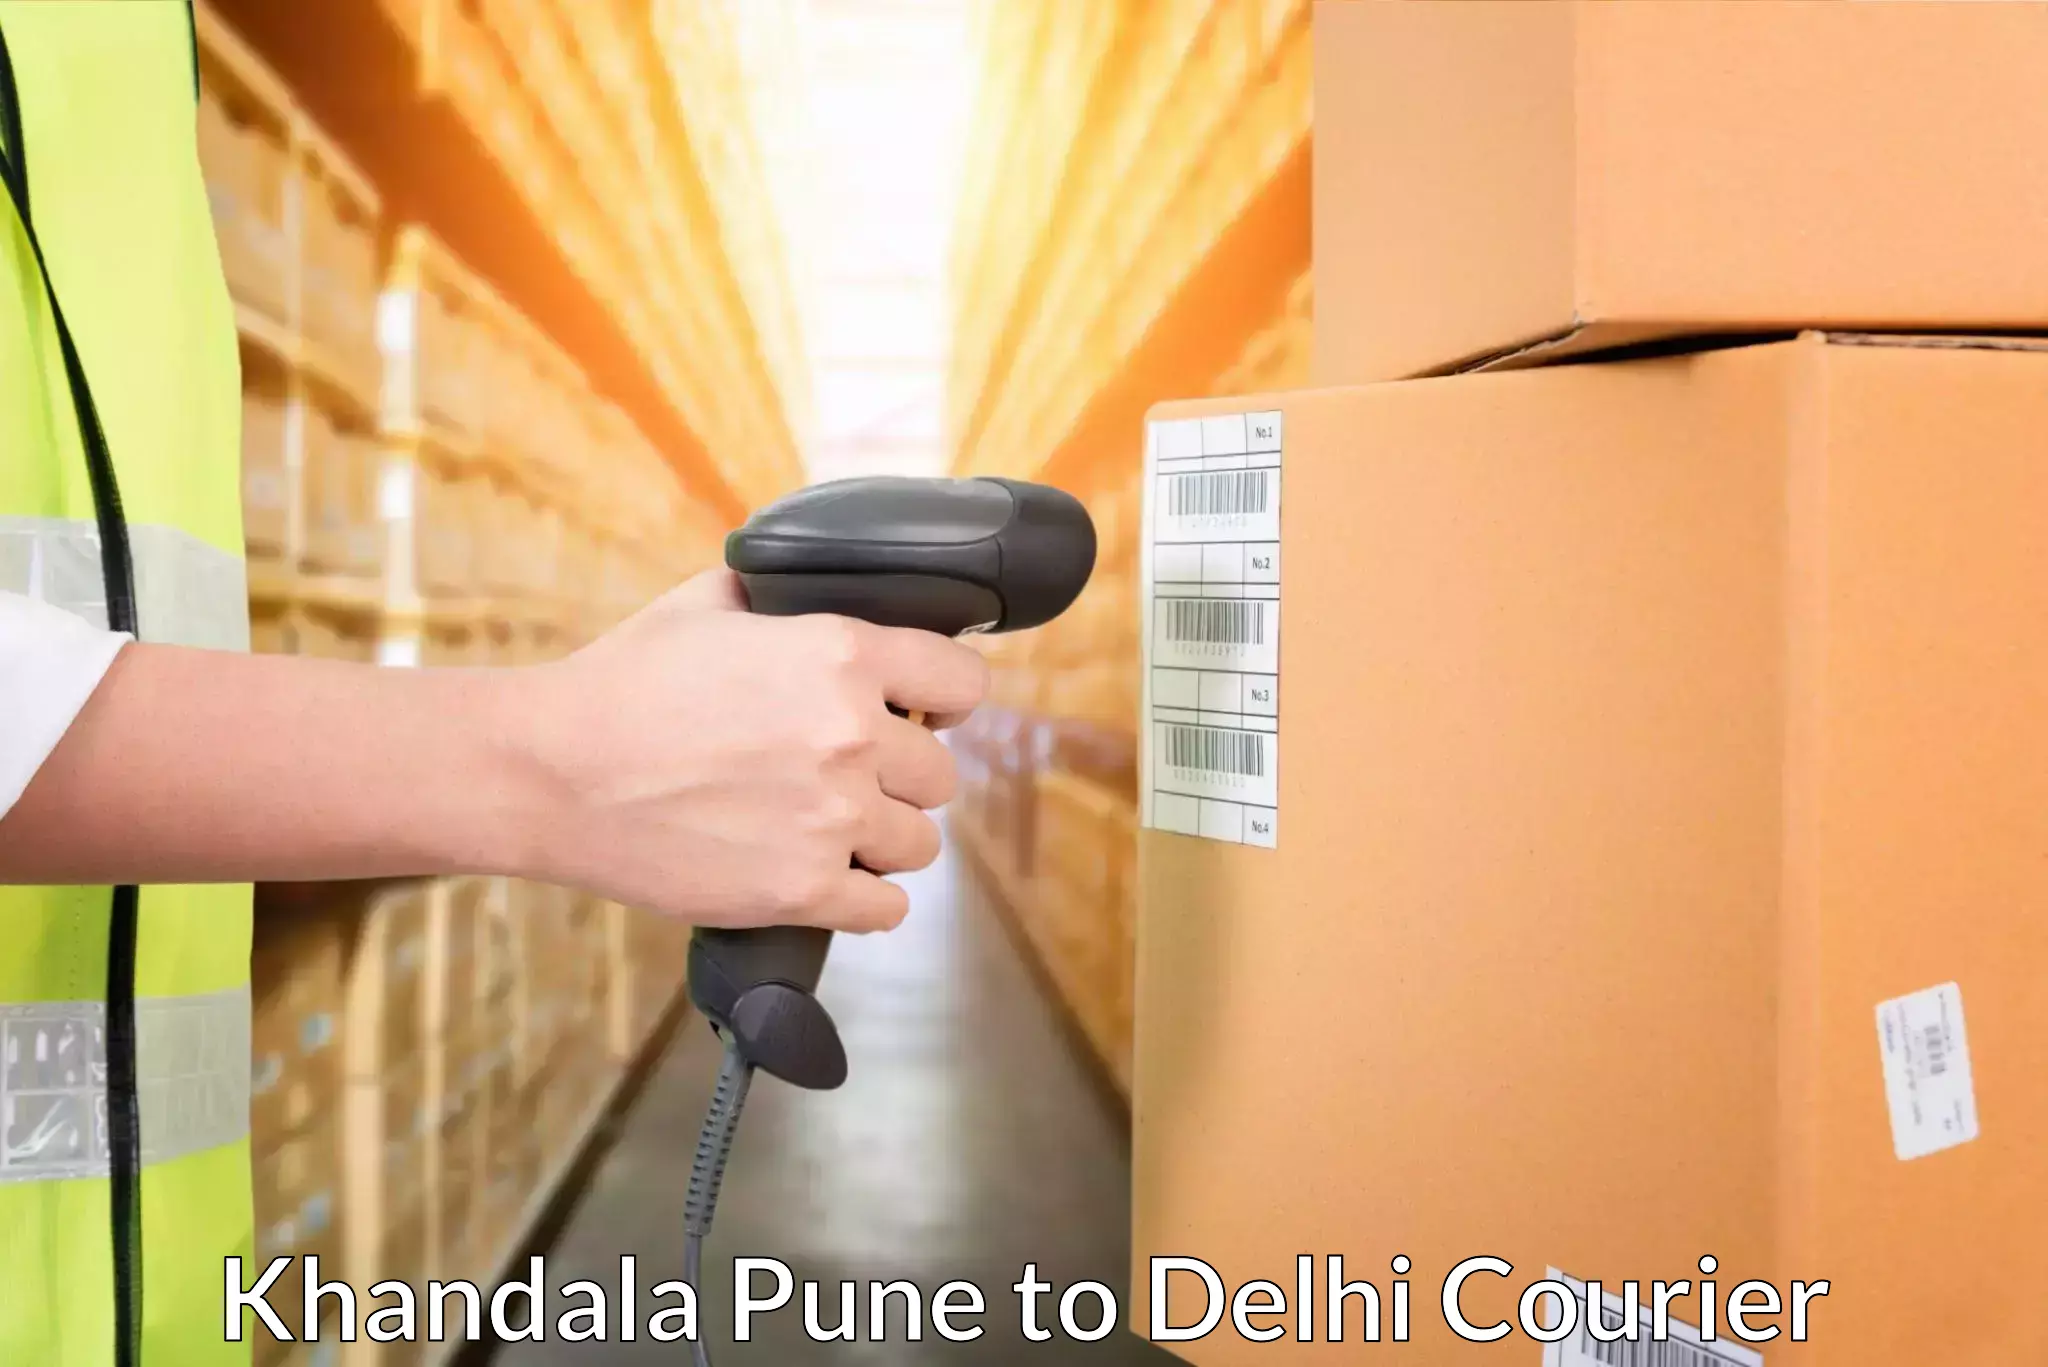 24/7 shipping services Khandala Pune to NCR